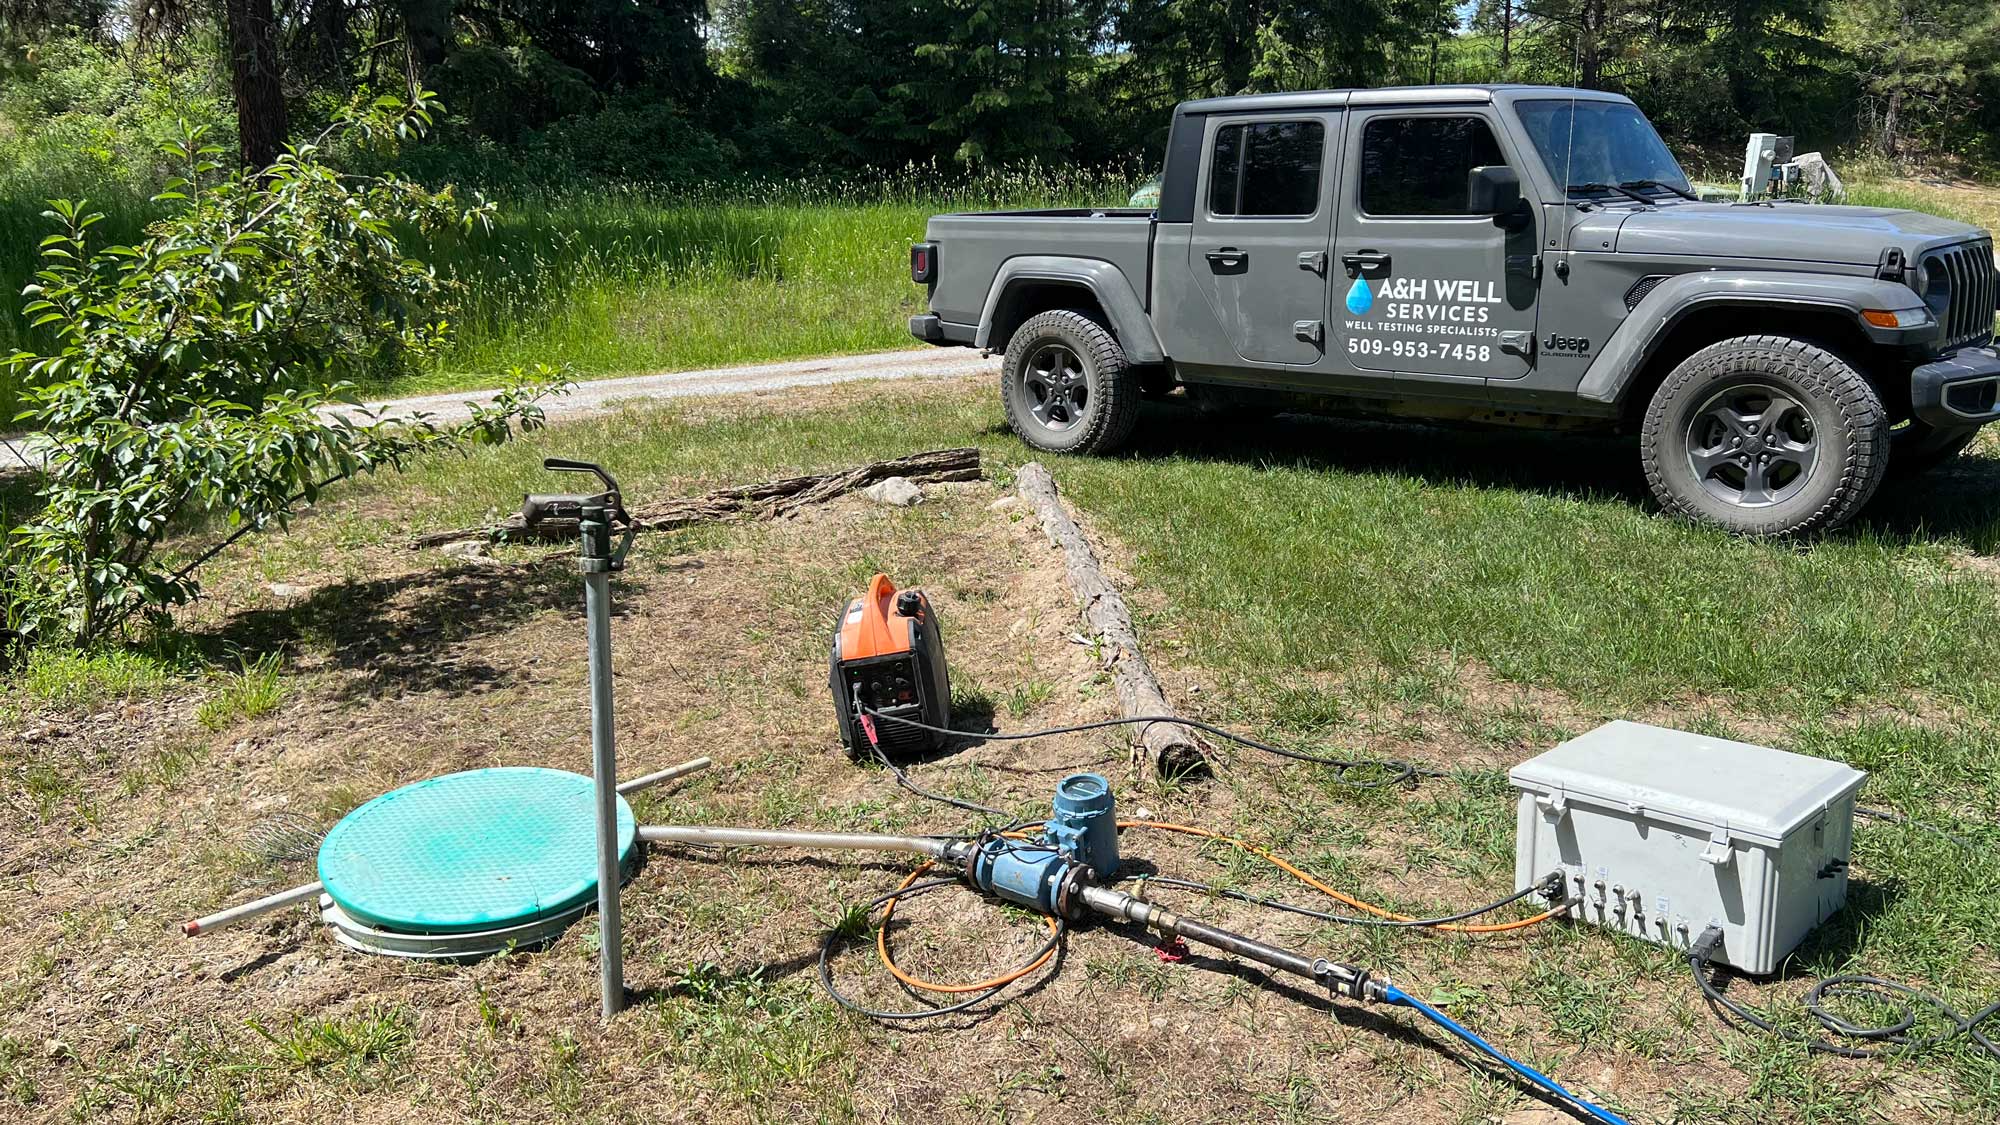 Continuous Water Quality Data Brings New Perspective to Pumping Tests